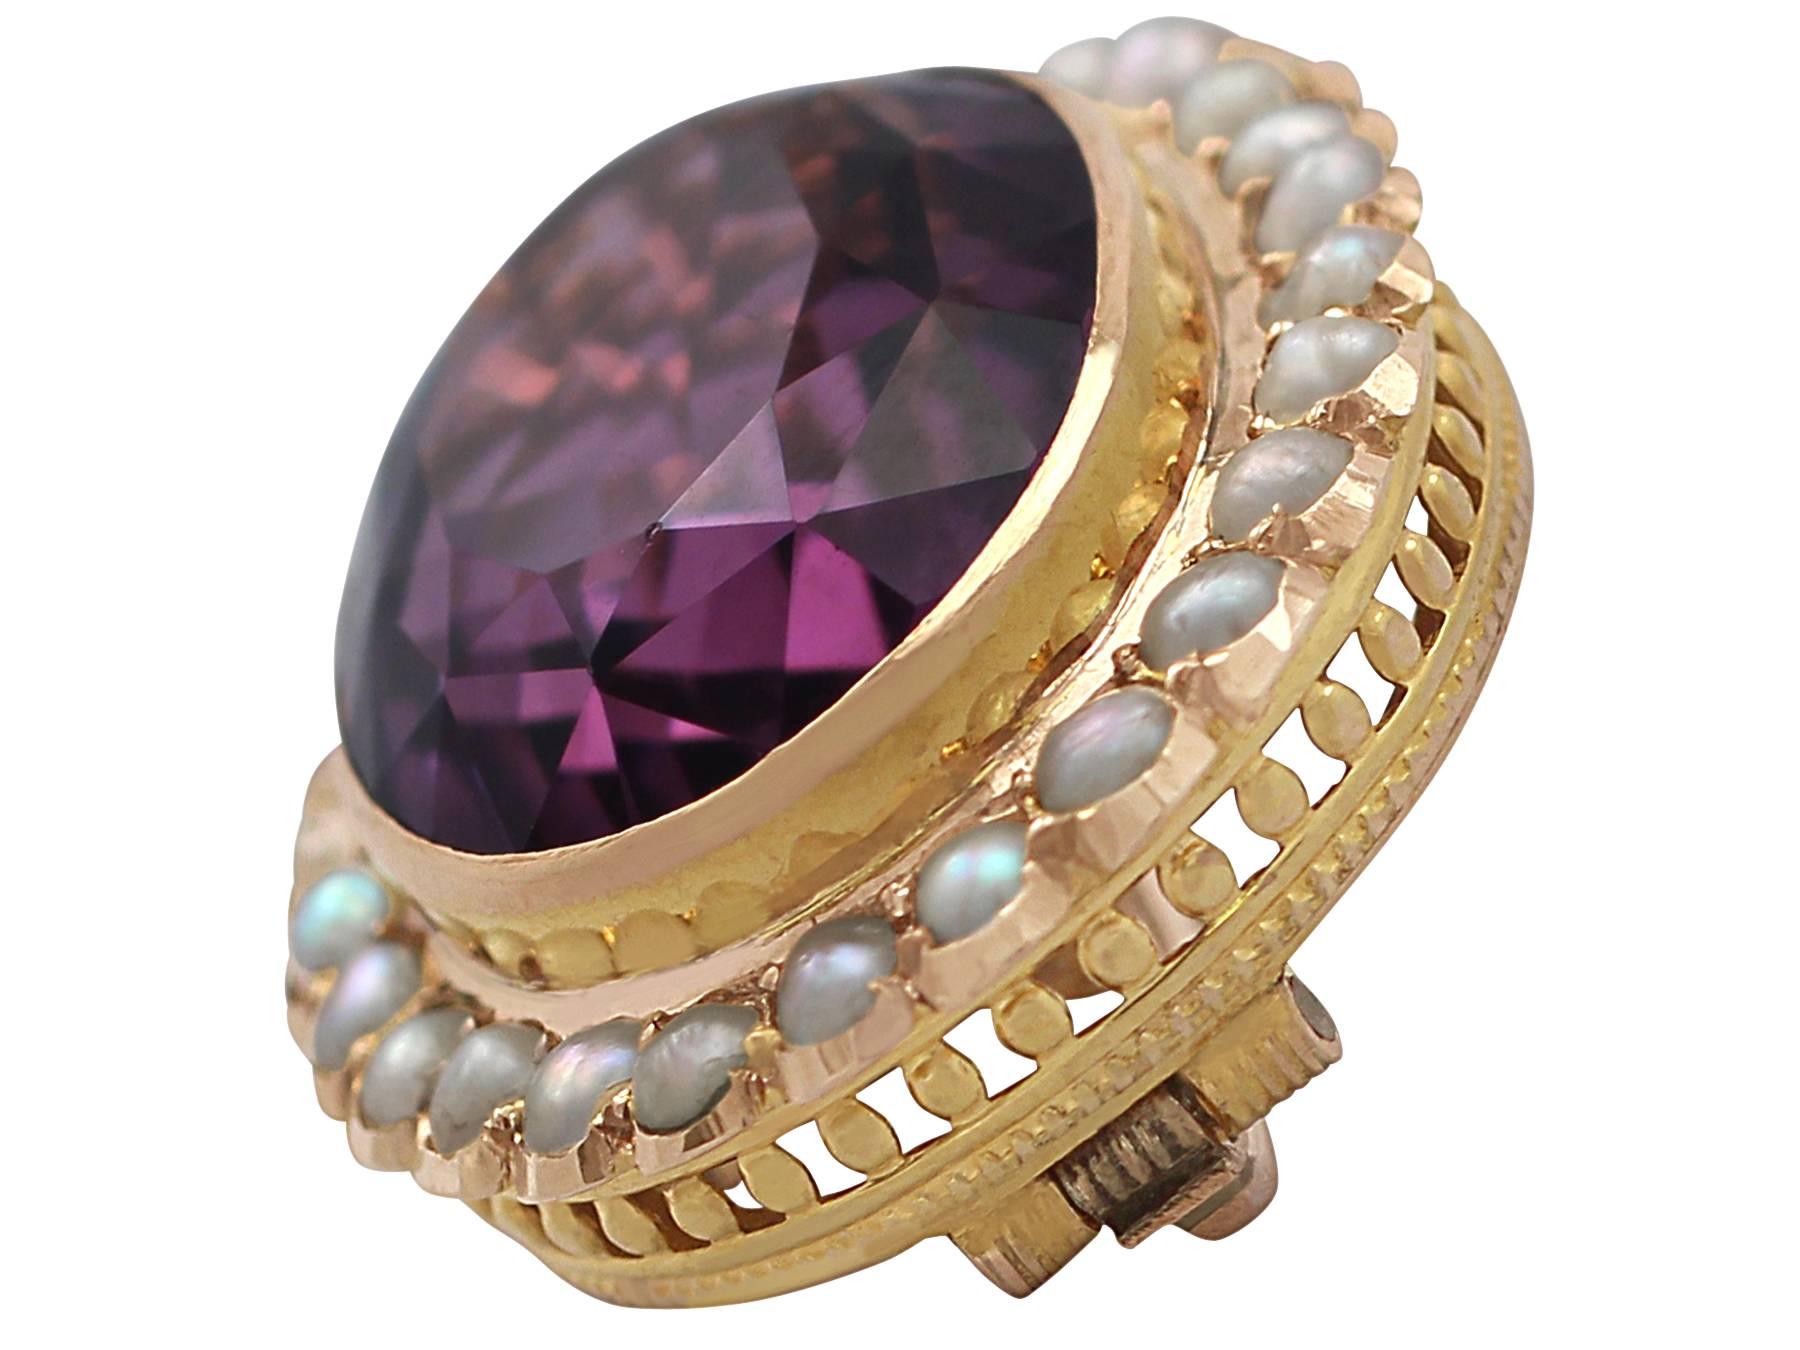 A very fine and impressive antique Edwardian 17.05 carat amethyst and seed pearl, 9 karat yellow gold brooch: part of our antique jewelry and estate jewelry collections

This impressive antique amethyst brooch has been crafted in 9k yellow